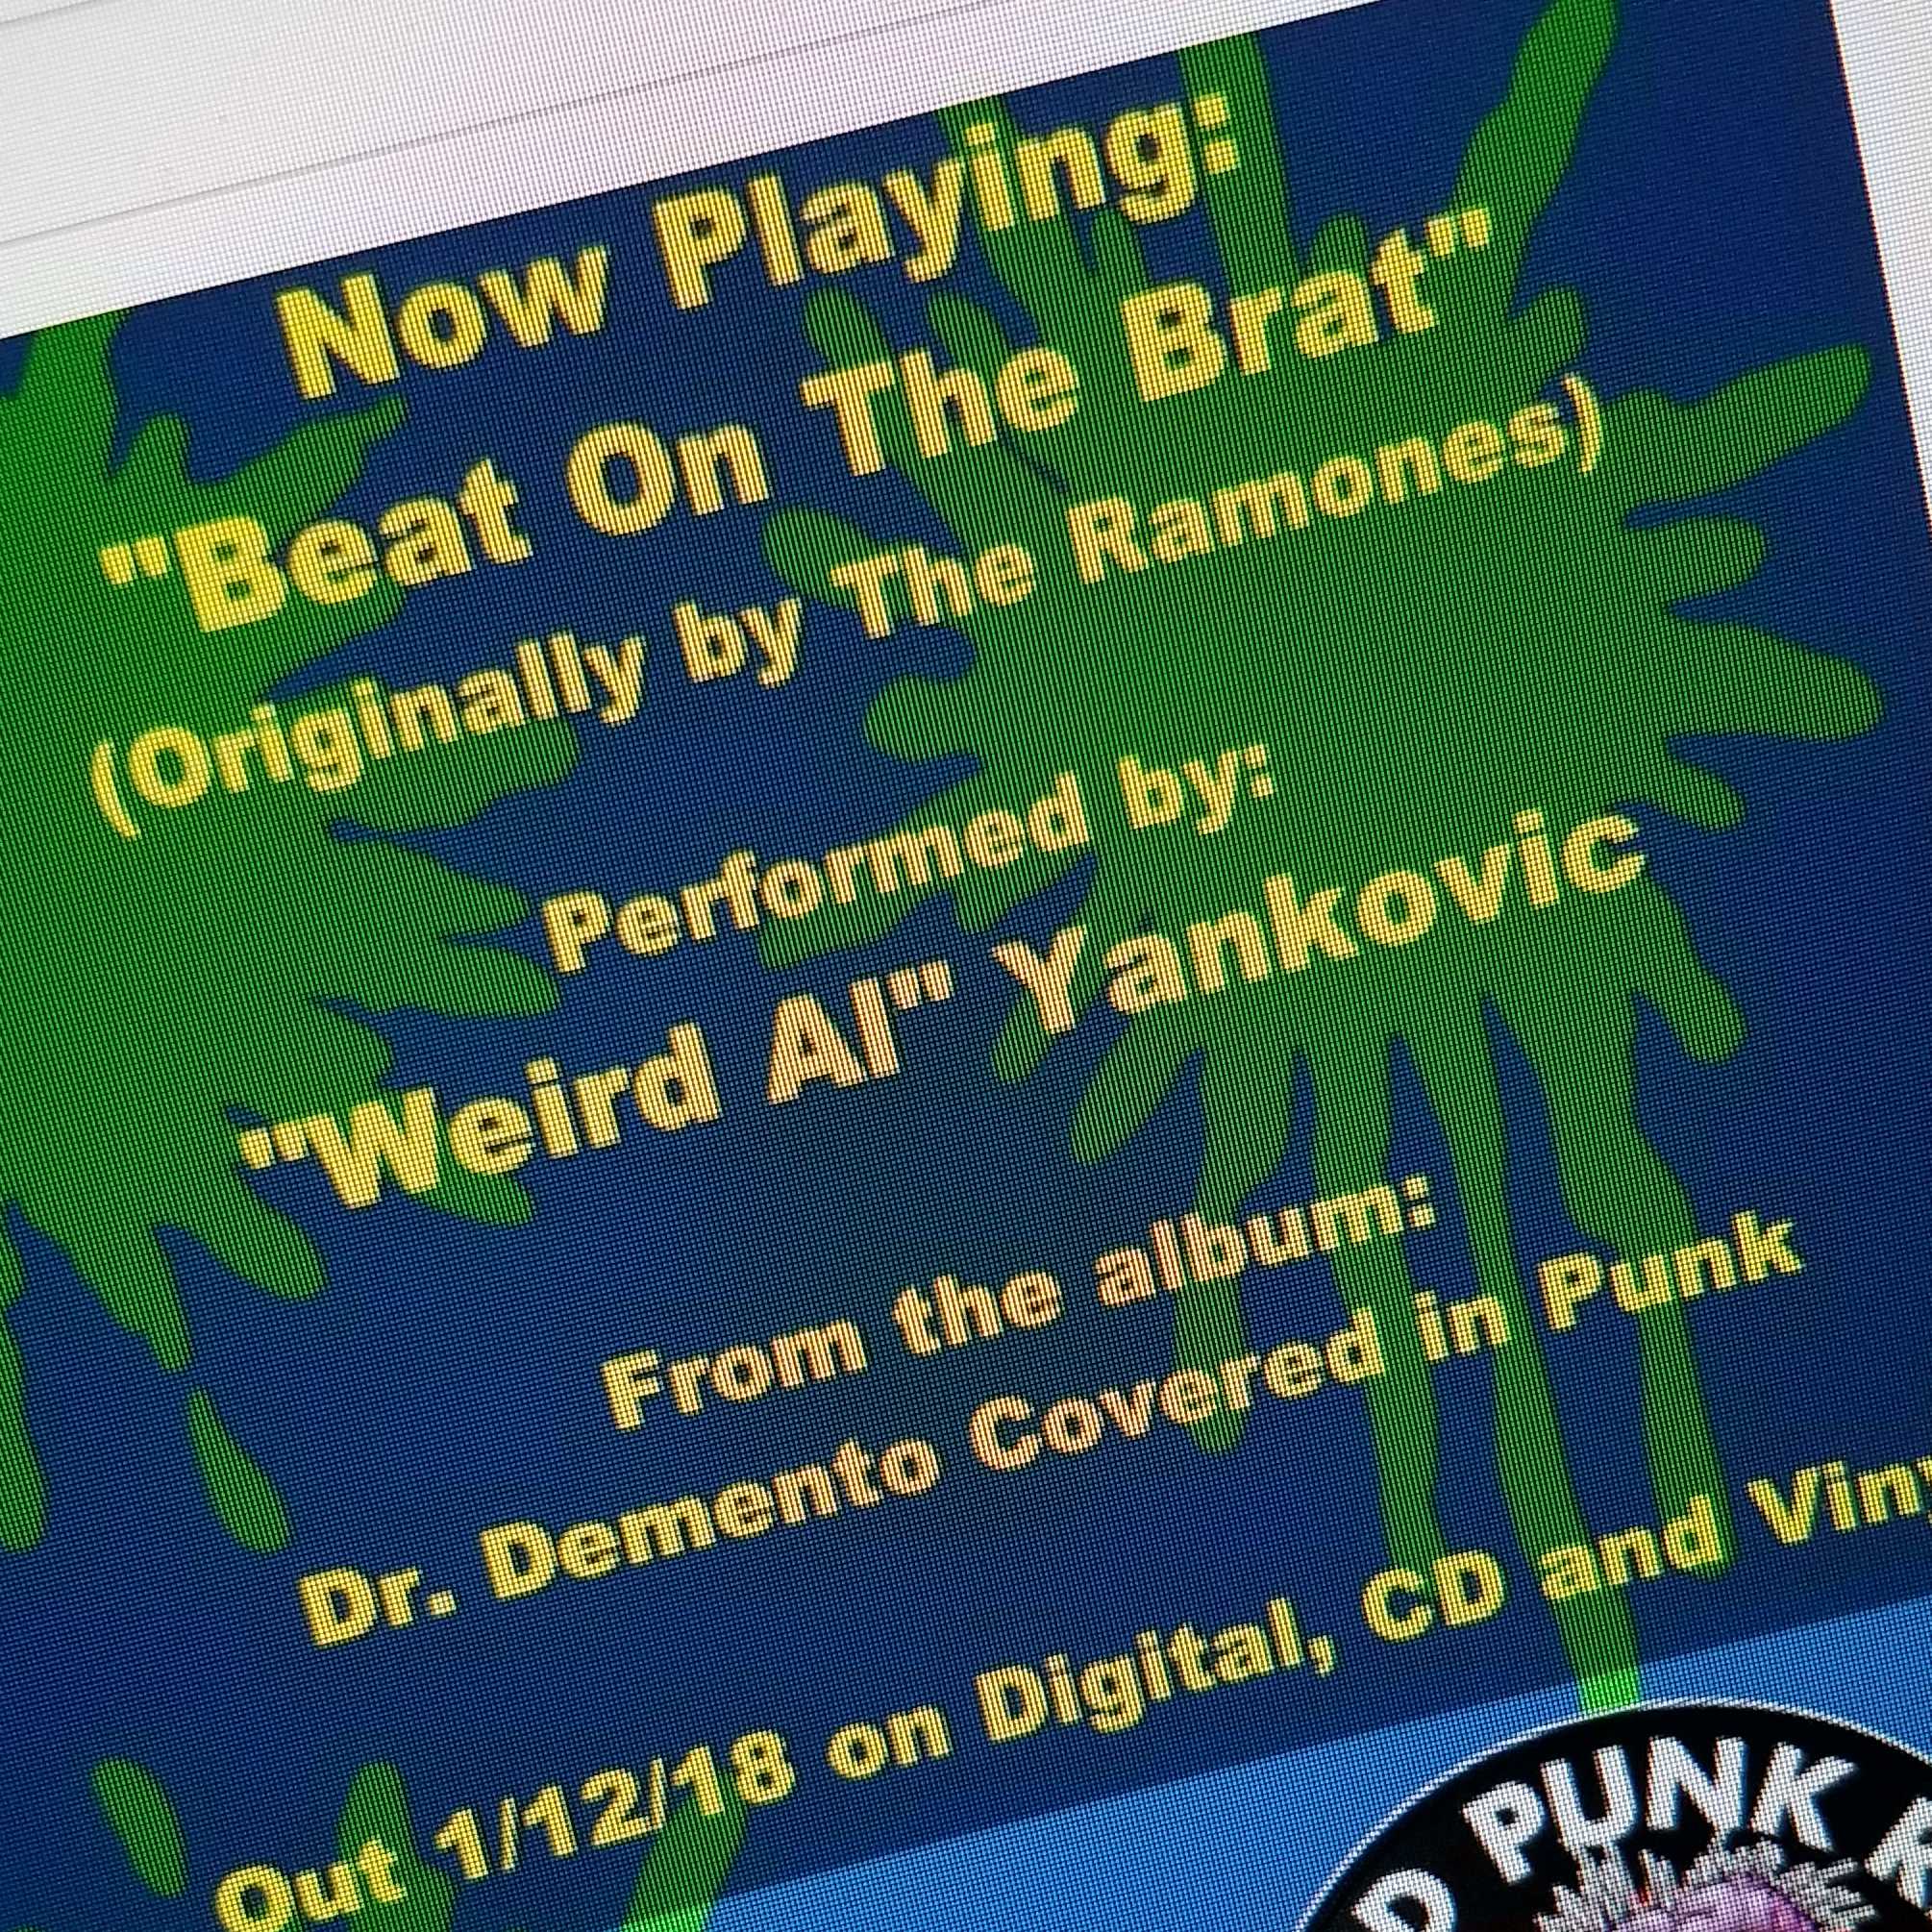 GET YOUR MUSIC NERD ON NEWS Nov 23, 2017: DR. DEMENTO COVERED IN PUNK / WEIRD AL